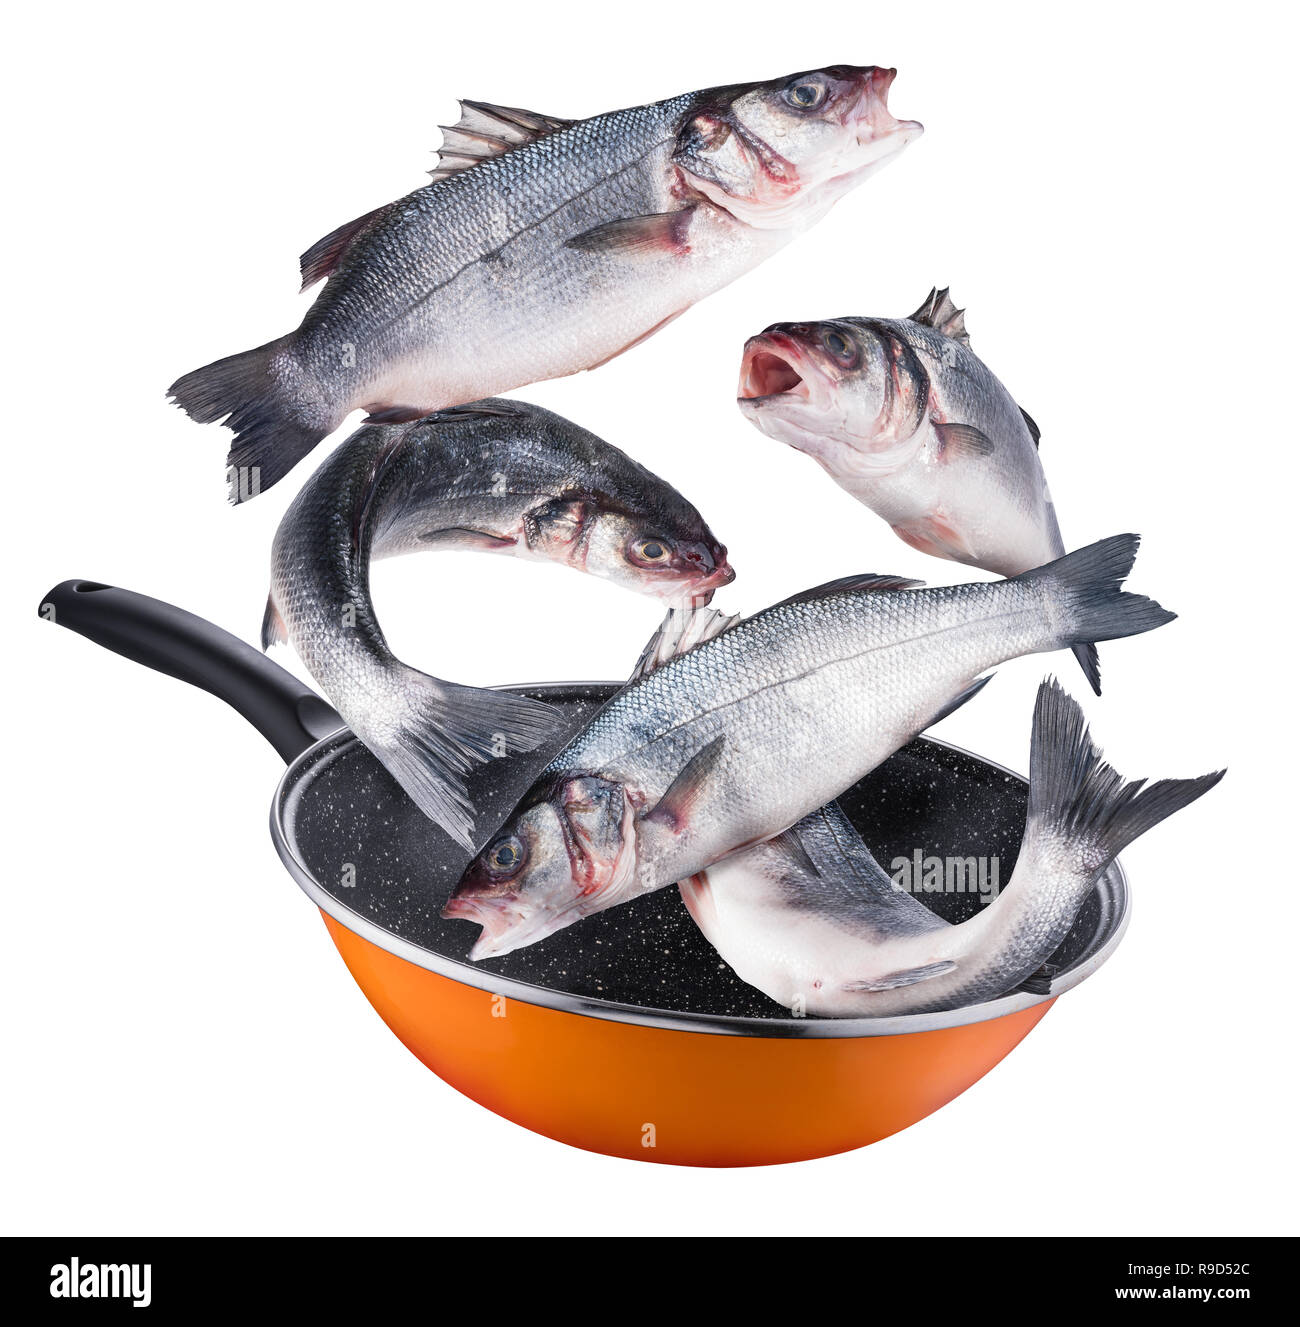 Flying seabass fishes falling into a frying pan. Flying motion effect of cooking process. File contains clipping path. Stock Photo